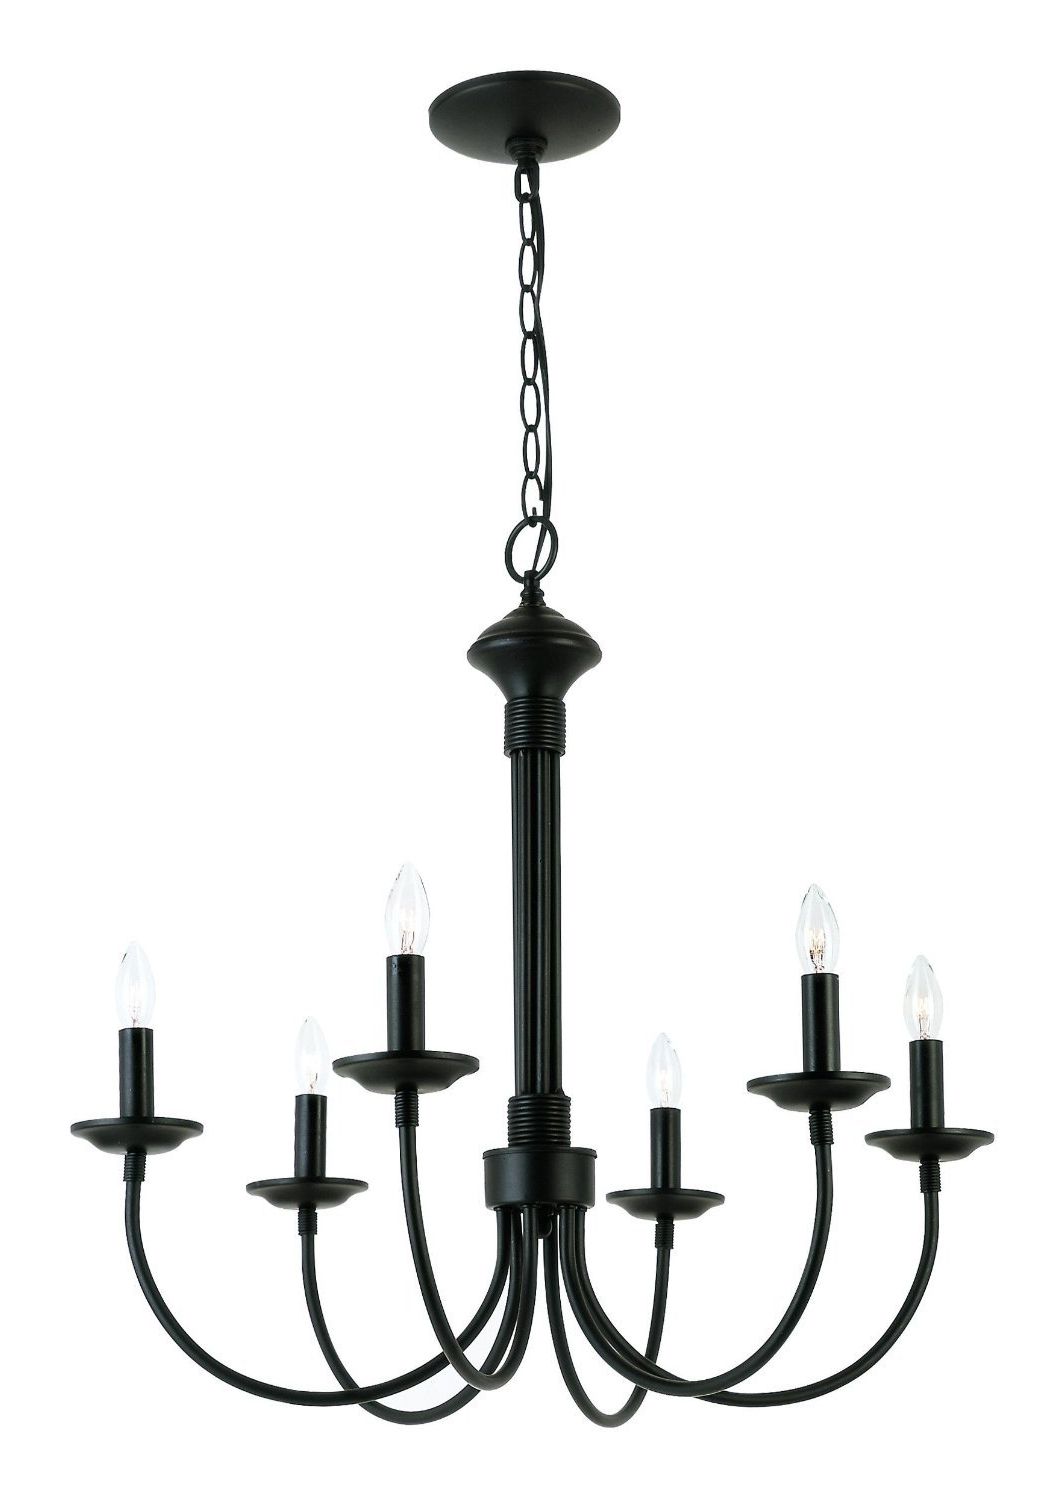 Shaylee 6 Light Candle Style Chandelier Within Best And Newest Hamza 6 Light Candle Style Chandeliers (View 7 of 25)